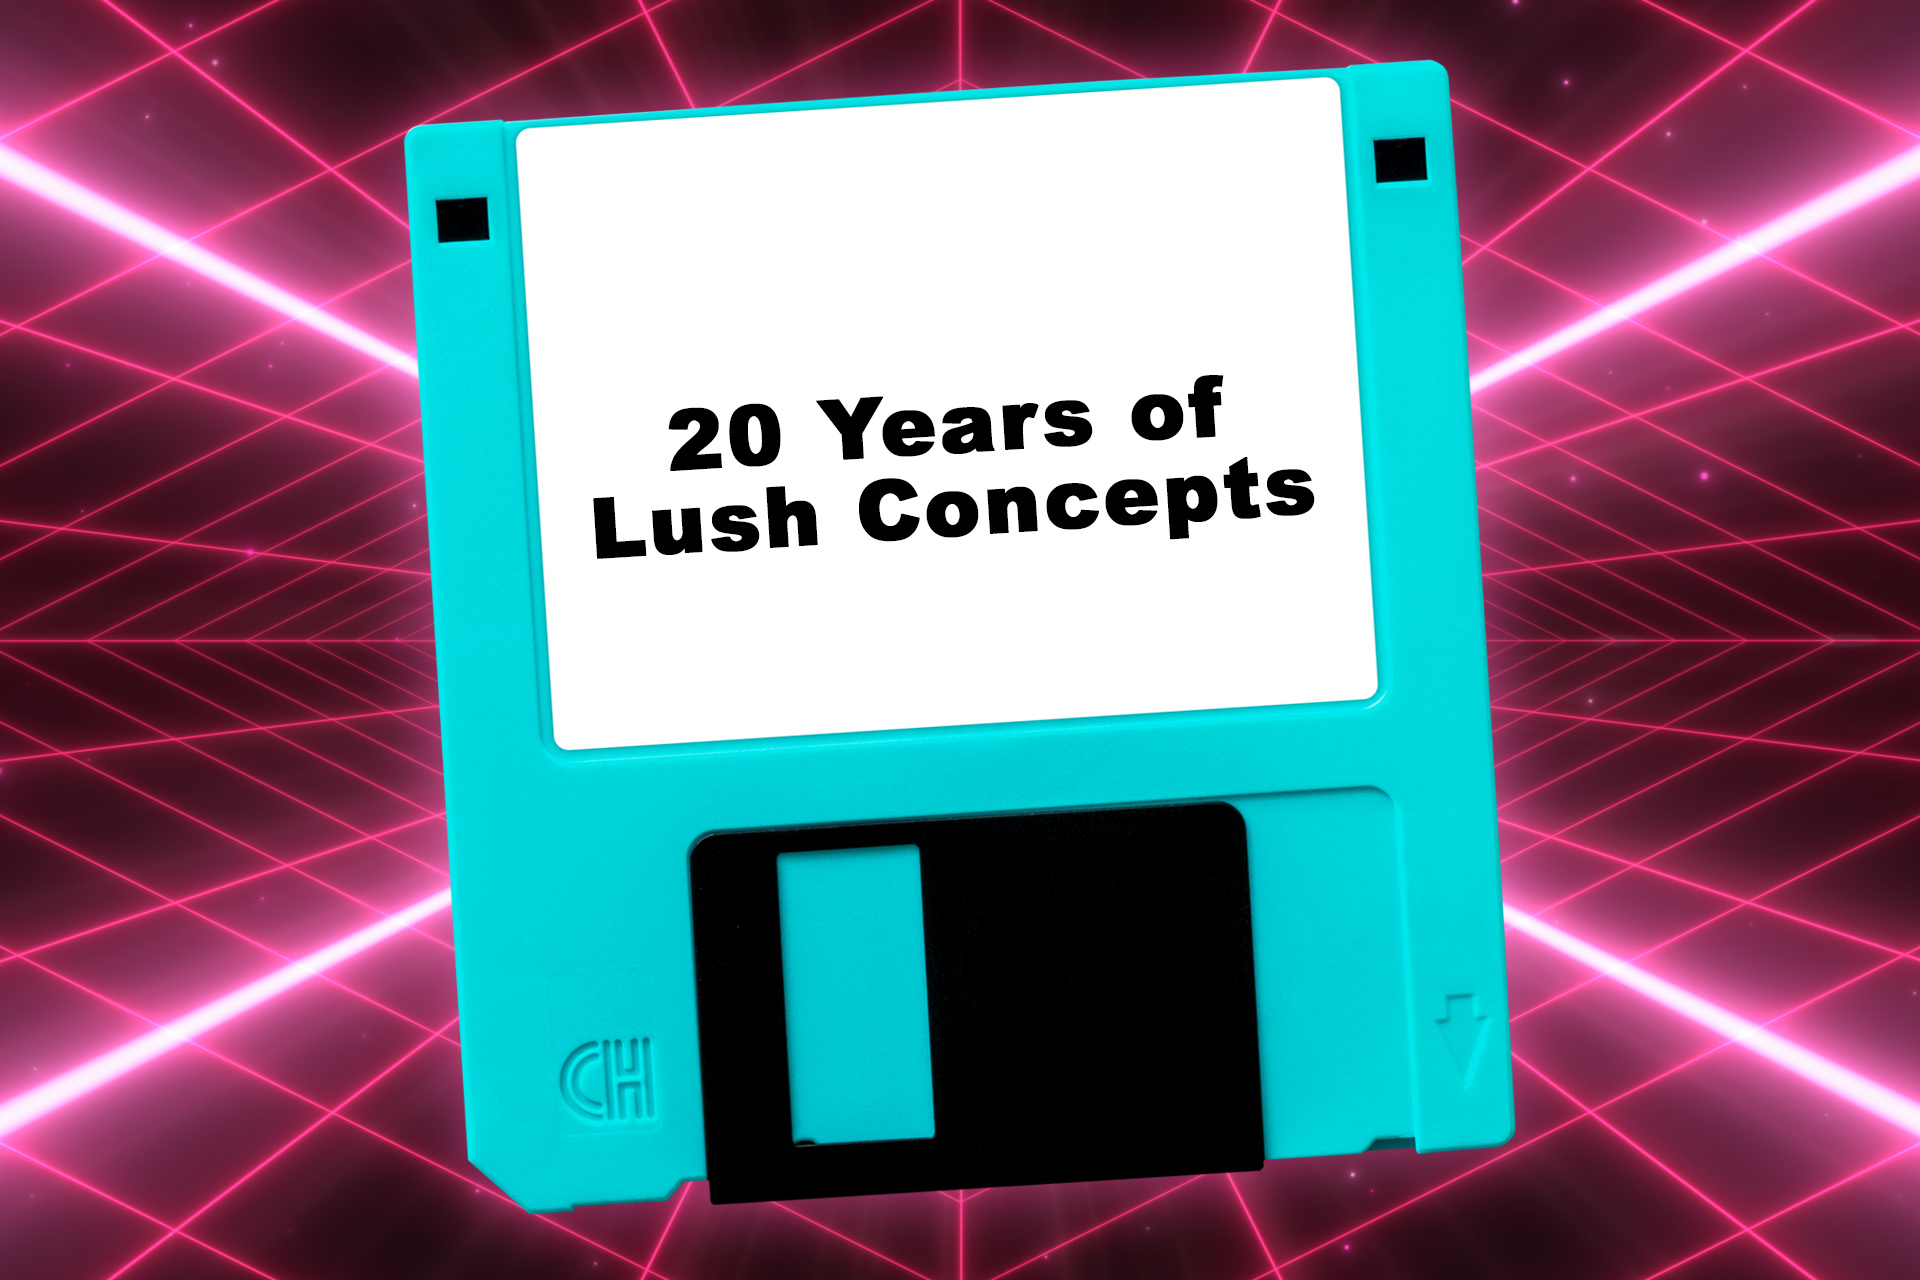 20 Years of Lush Concepts